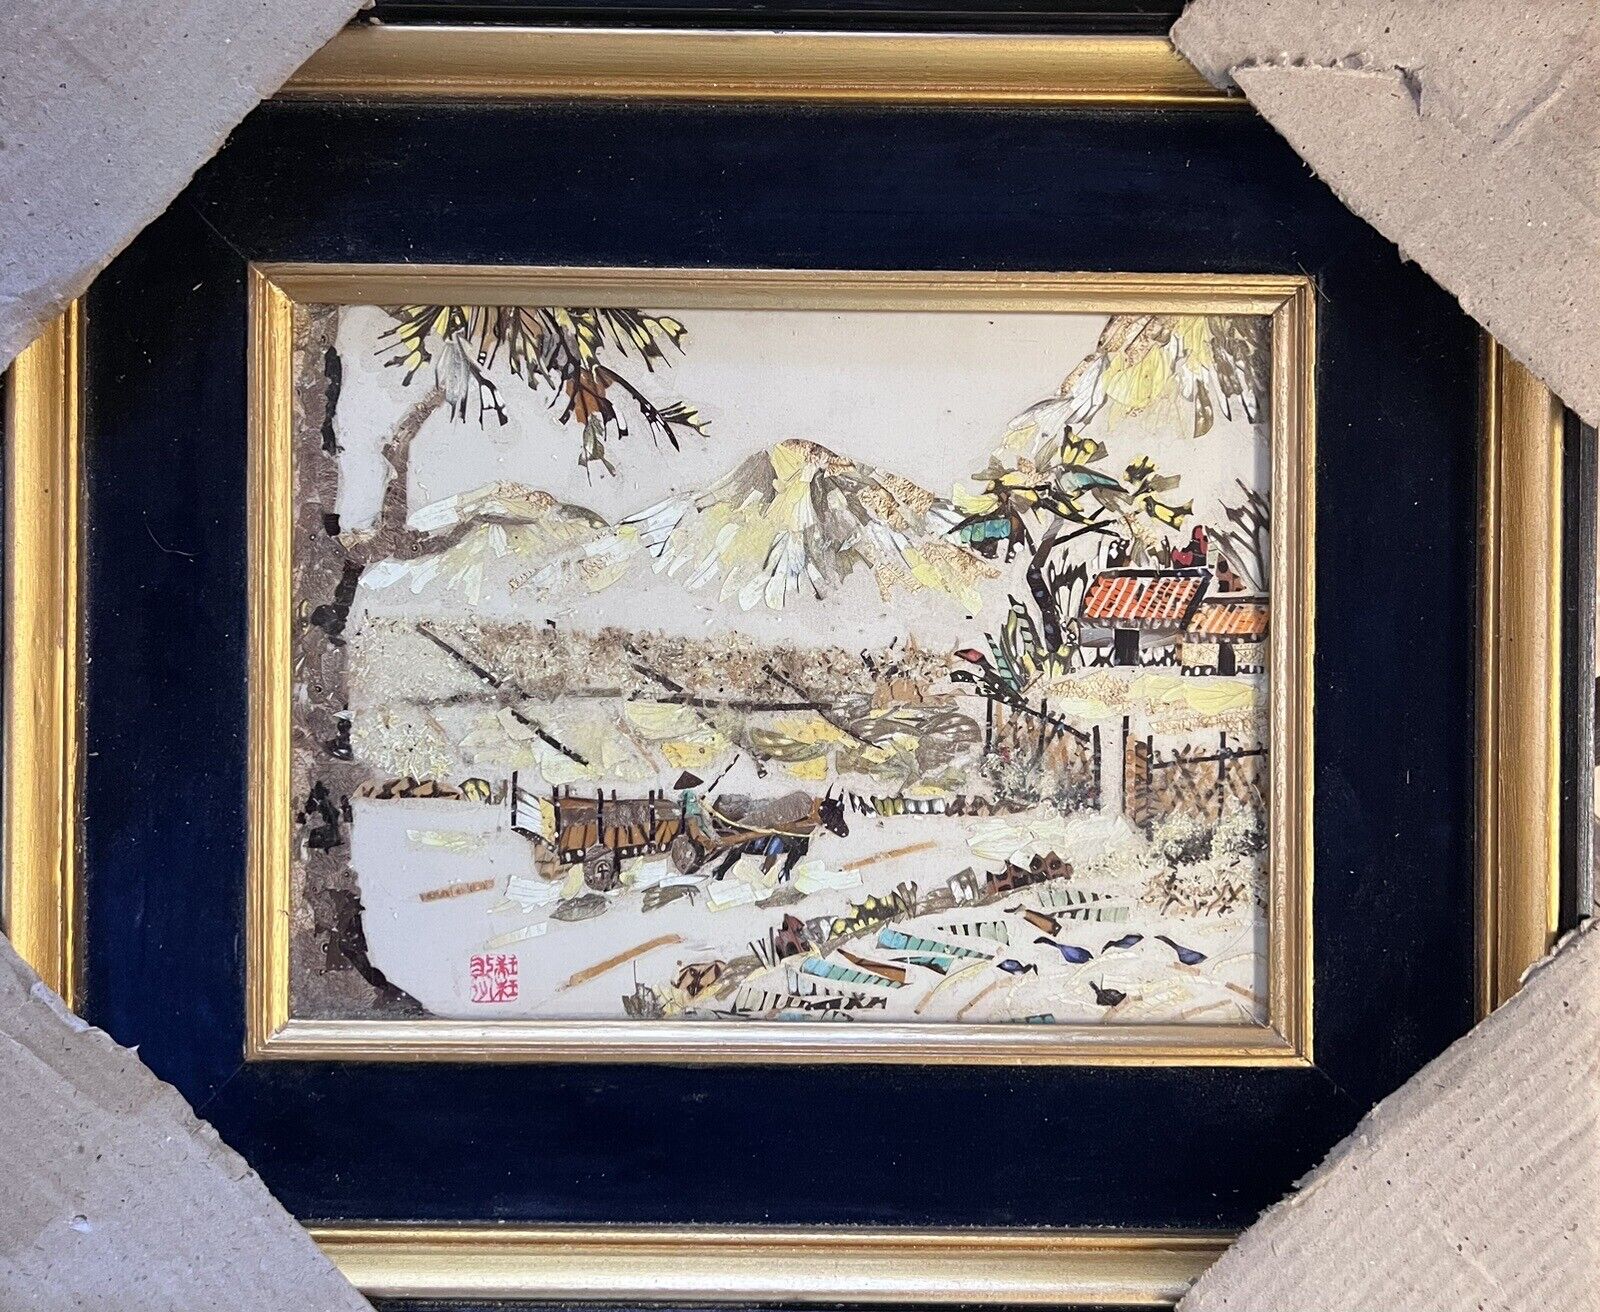 Vintage Unique Asian Countryside Textured Paper Framed Art 19-1/4” x 16-1/4”